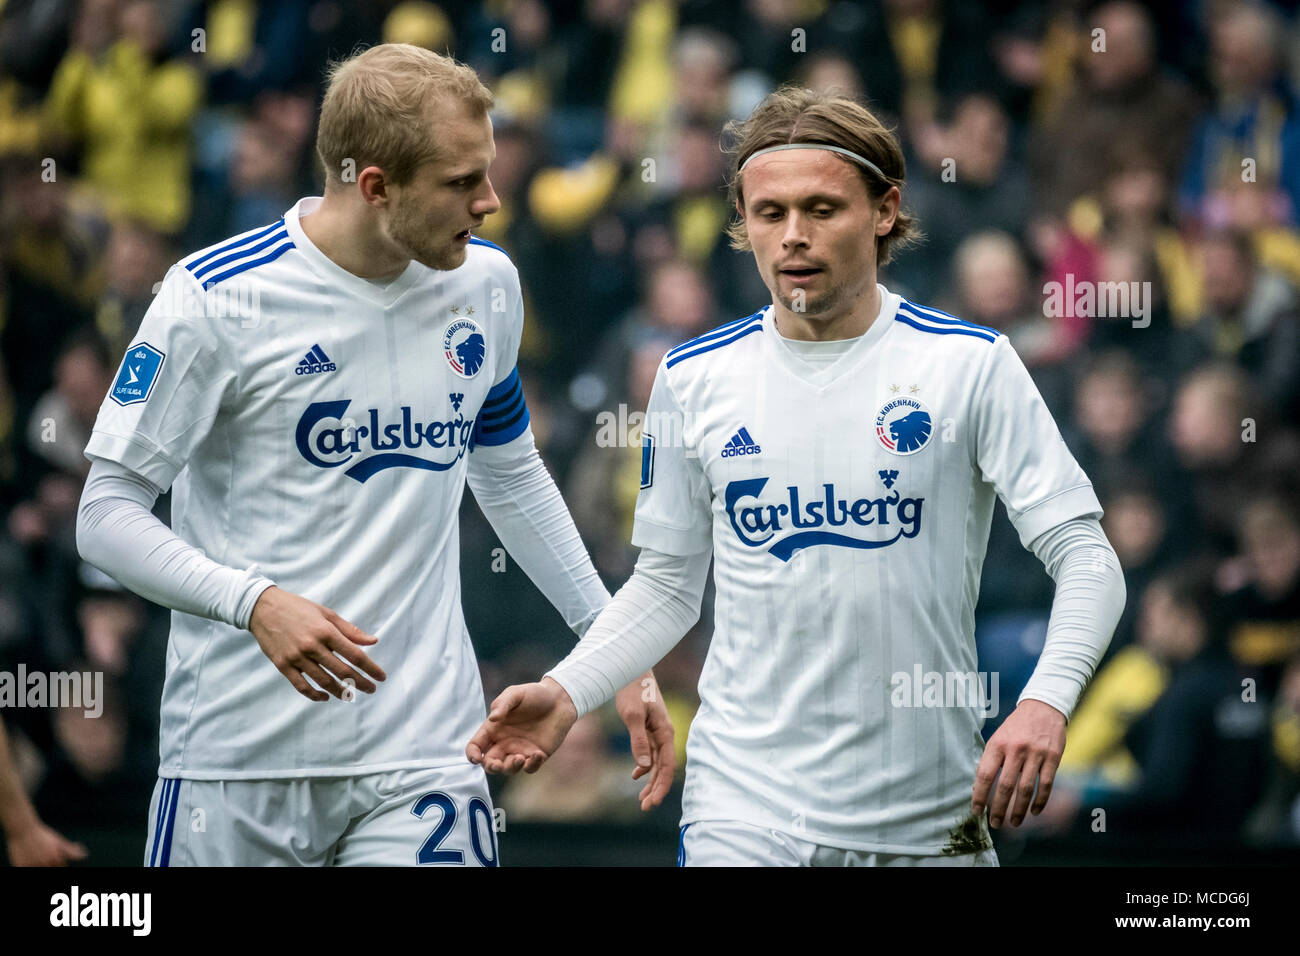 Denmark, Brøndby - April 15, 2018. Peter Ankersen and Nicolai Boilesen (2) of FC Copenhagen seen during the ALKA Superliga match against the rivals from Brøndby IF at Brøndby Stadion. (Photo